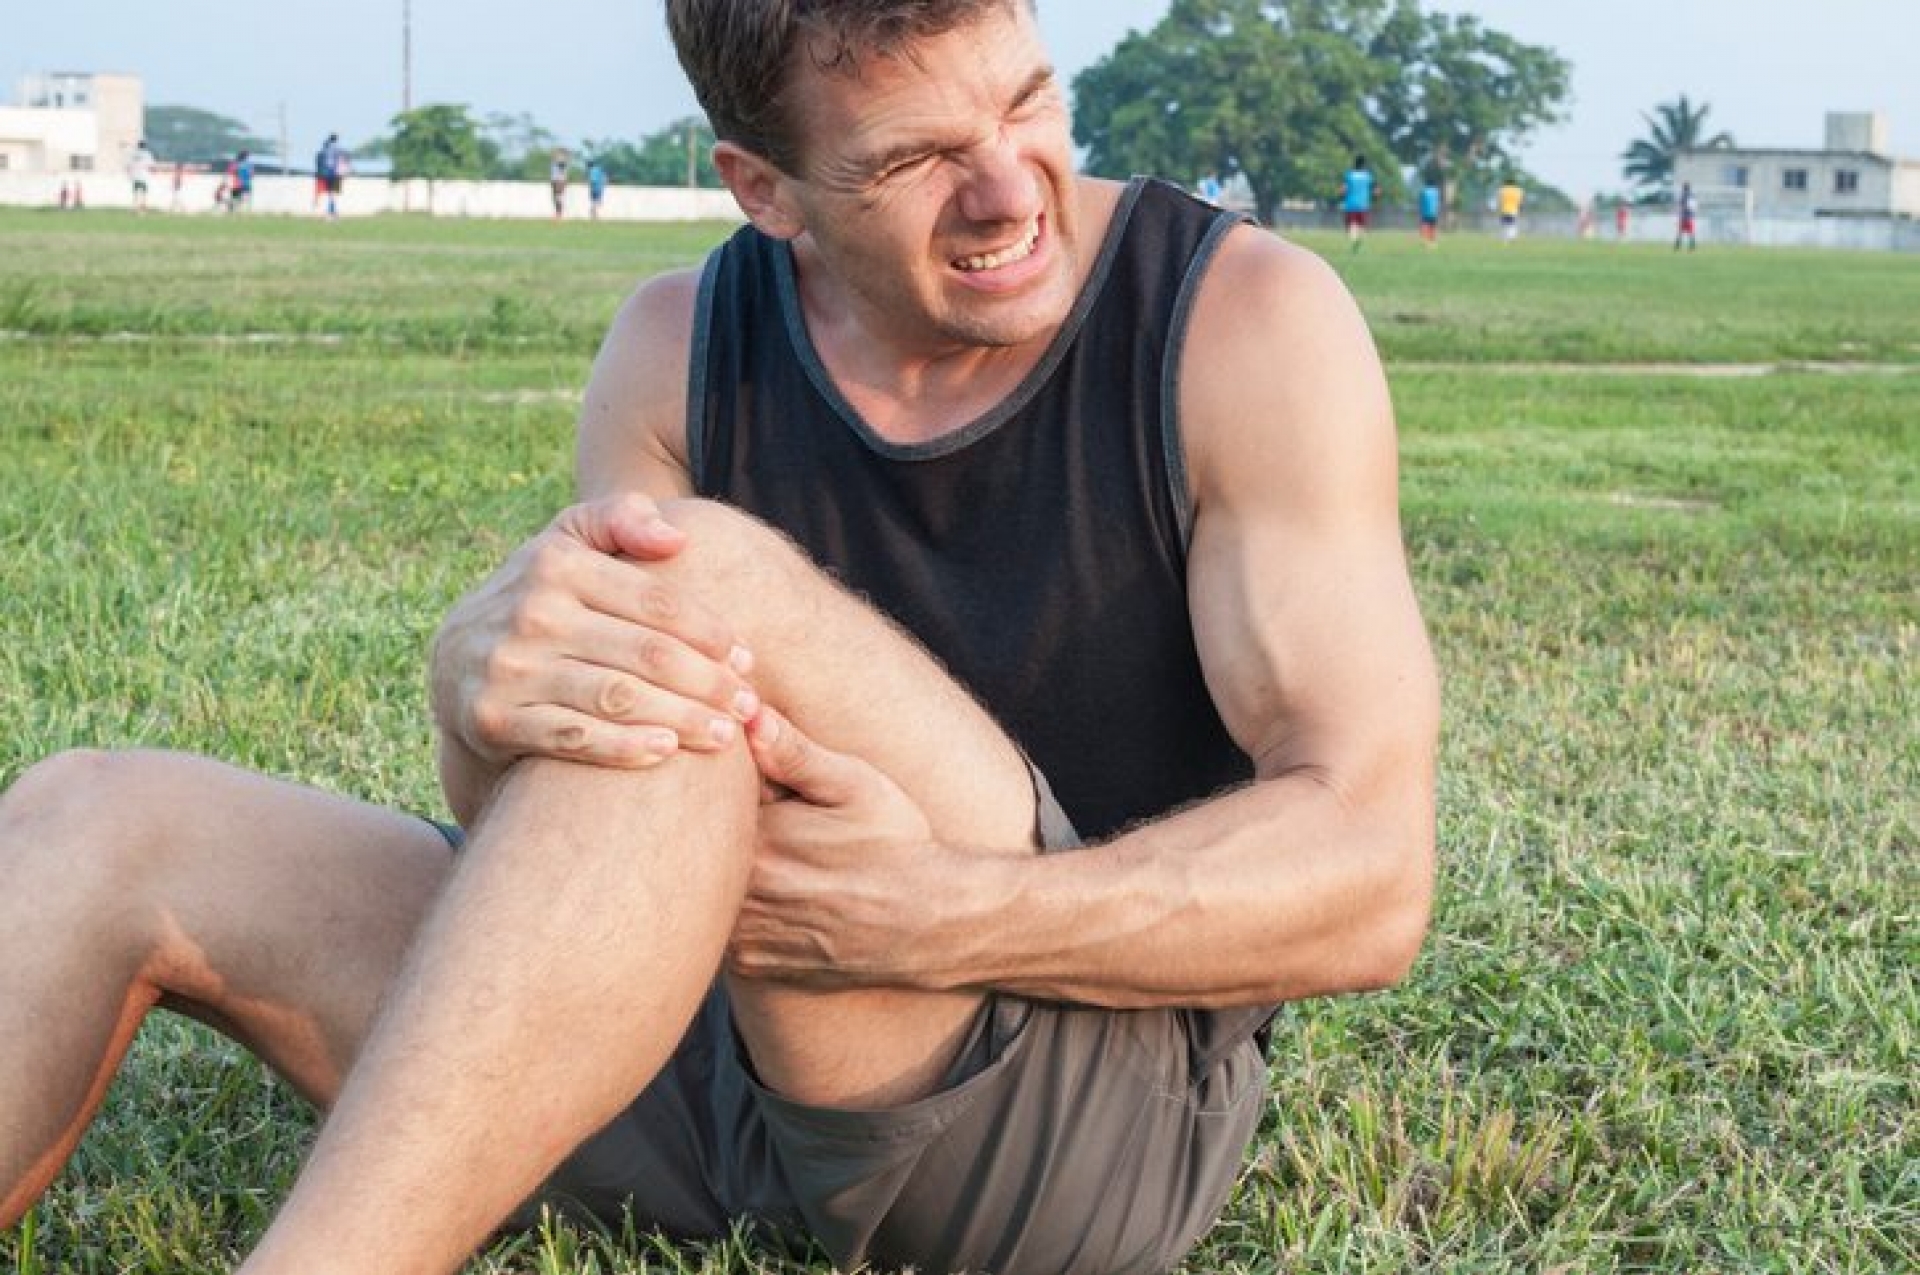 How to treat a muscle strain? image